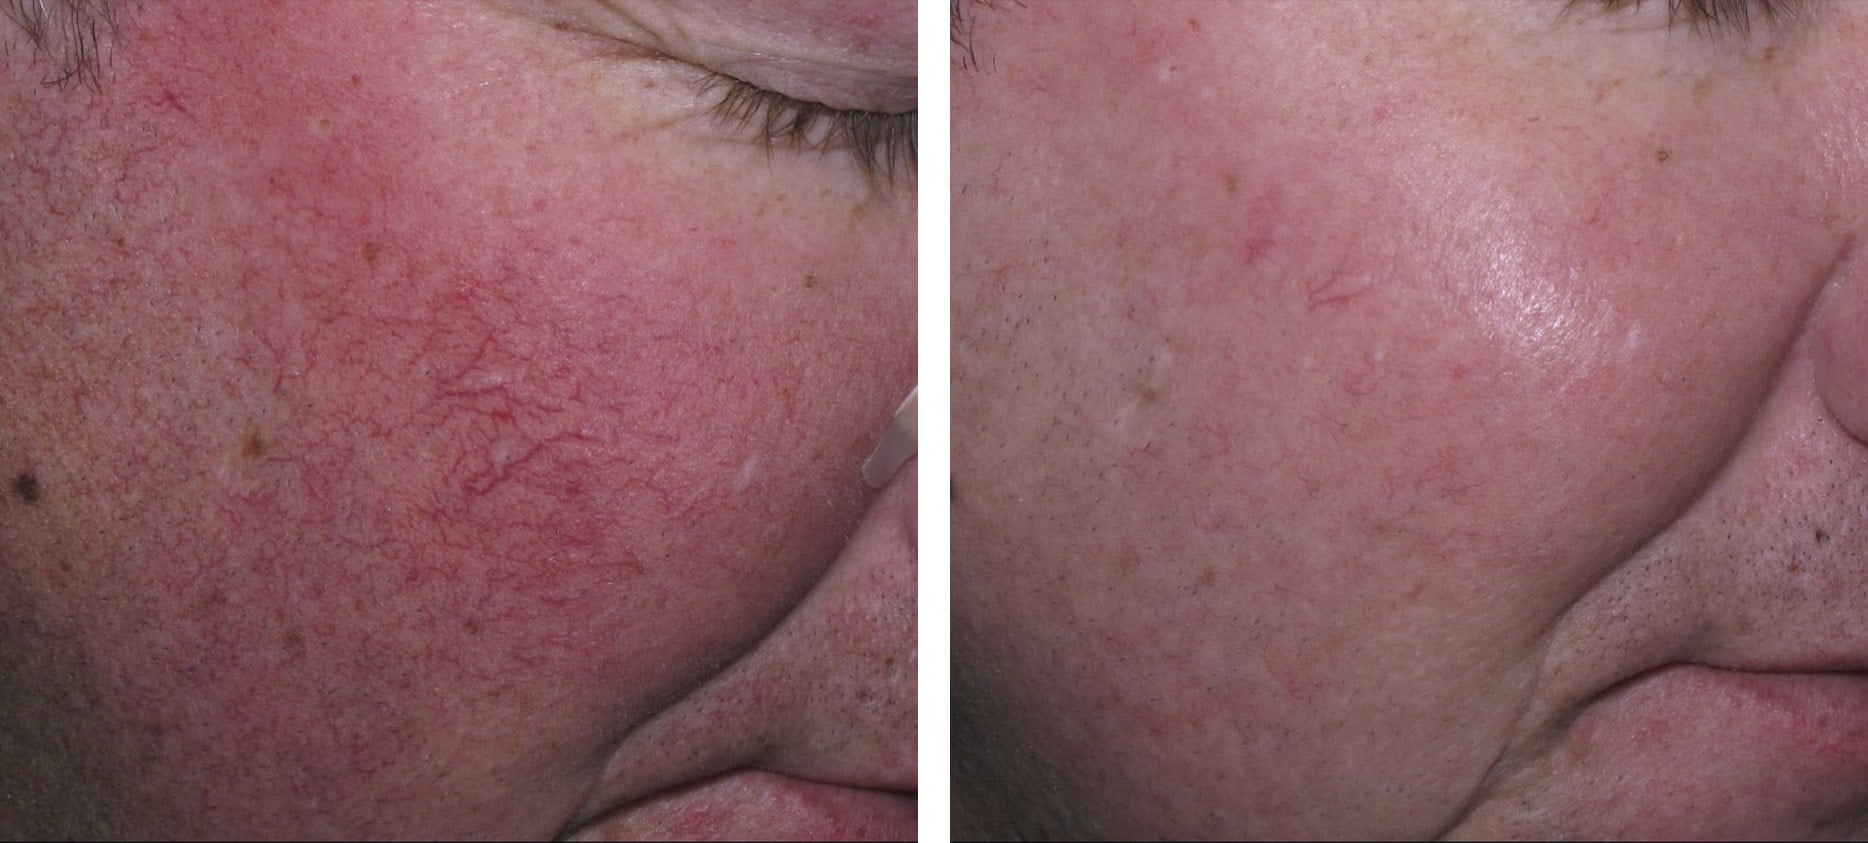 Rosacea before and after treatment at Kingsway Dermatology